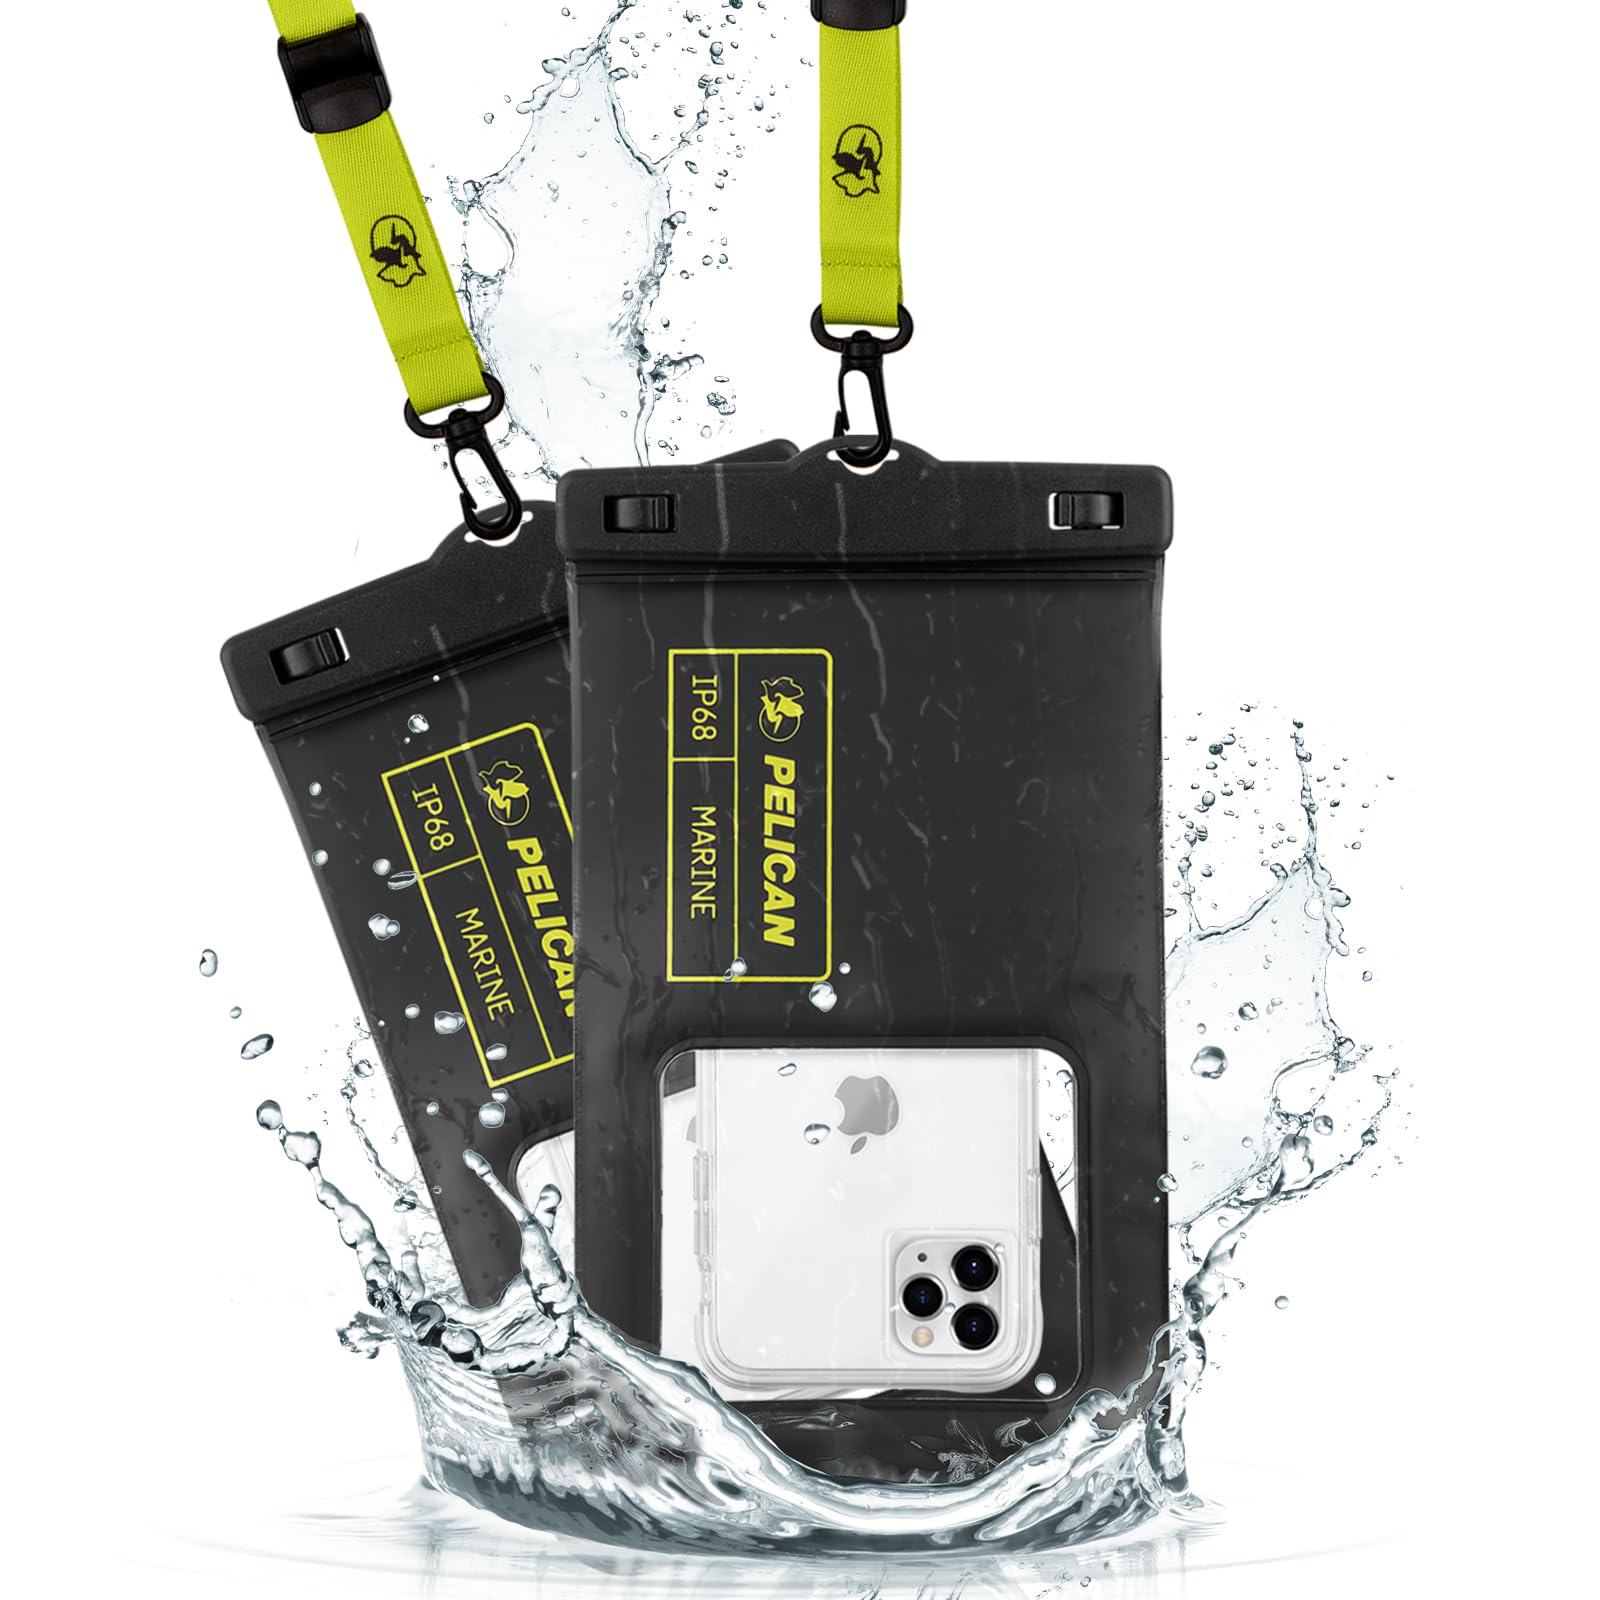 Pelican Marine 2 Pack - IP68 Waterproof Phone Pouch / Case (XL Size) - Floating Phone Case - iPhone 14 Pro Max/ 13 Pro Max/ 12 Pro Max/ 11/ S23 Ultra/ Pixel 7 - Detachable Lanyard - Black/Yellow